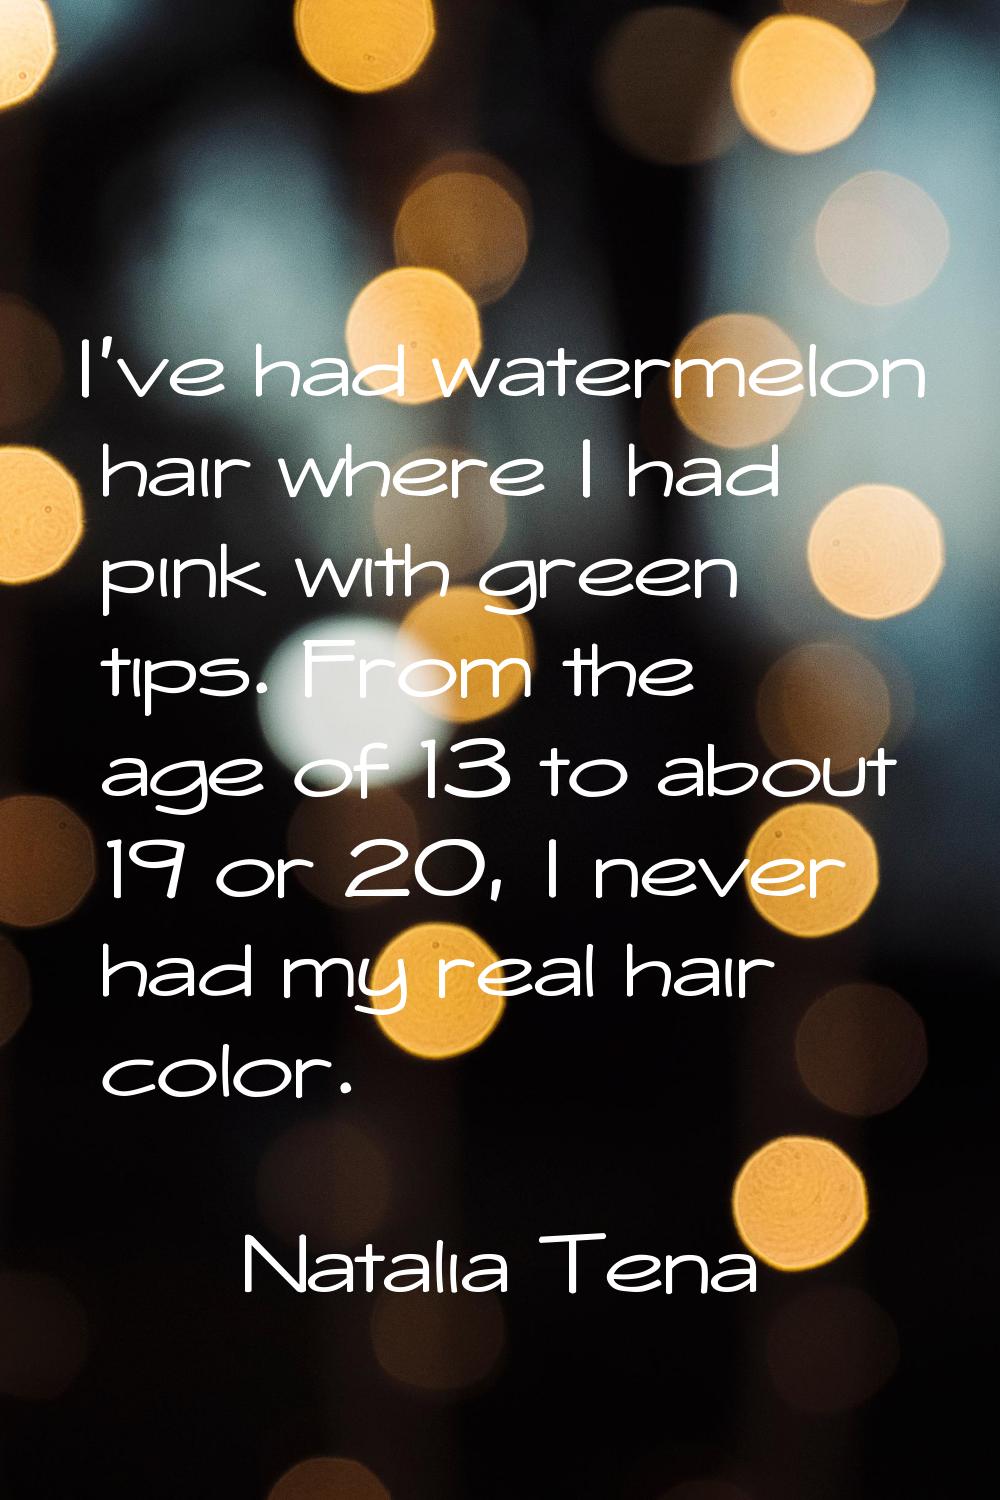 I've had watermelon hair where I had pink with green tips. From the age of 13 to about 19 or 20, I 